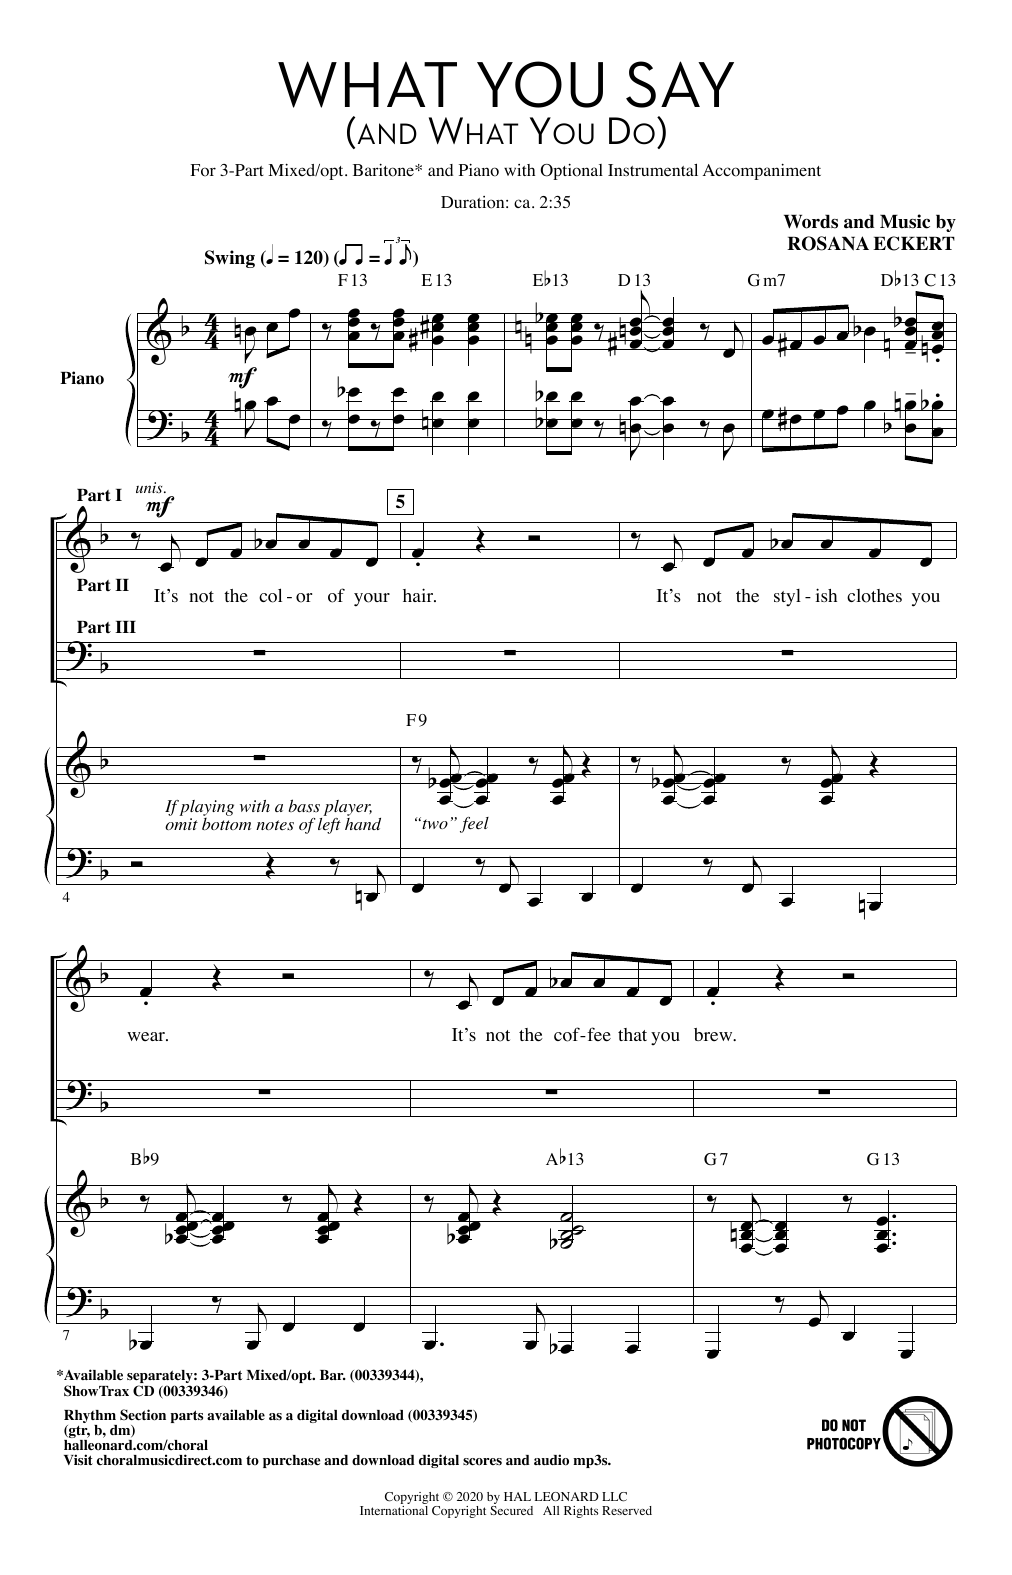 Download Rosana Eckert What You Say (And What You Do) Sheet Music